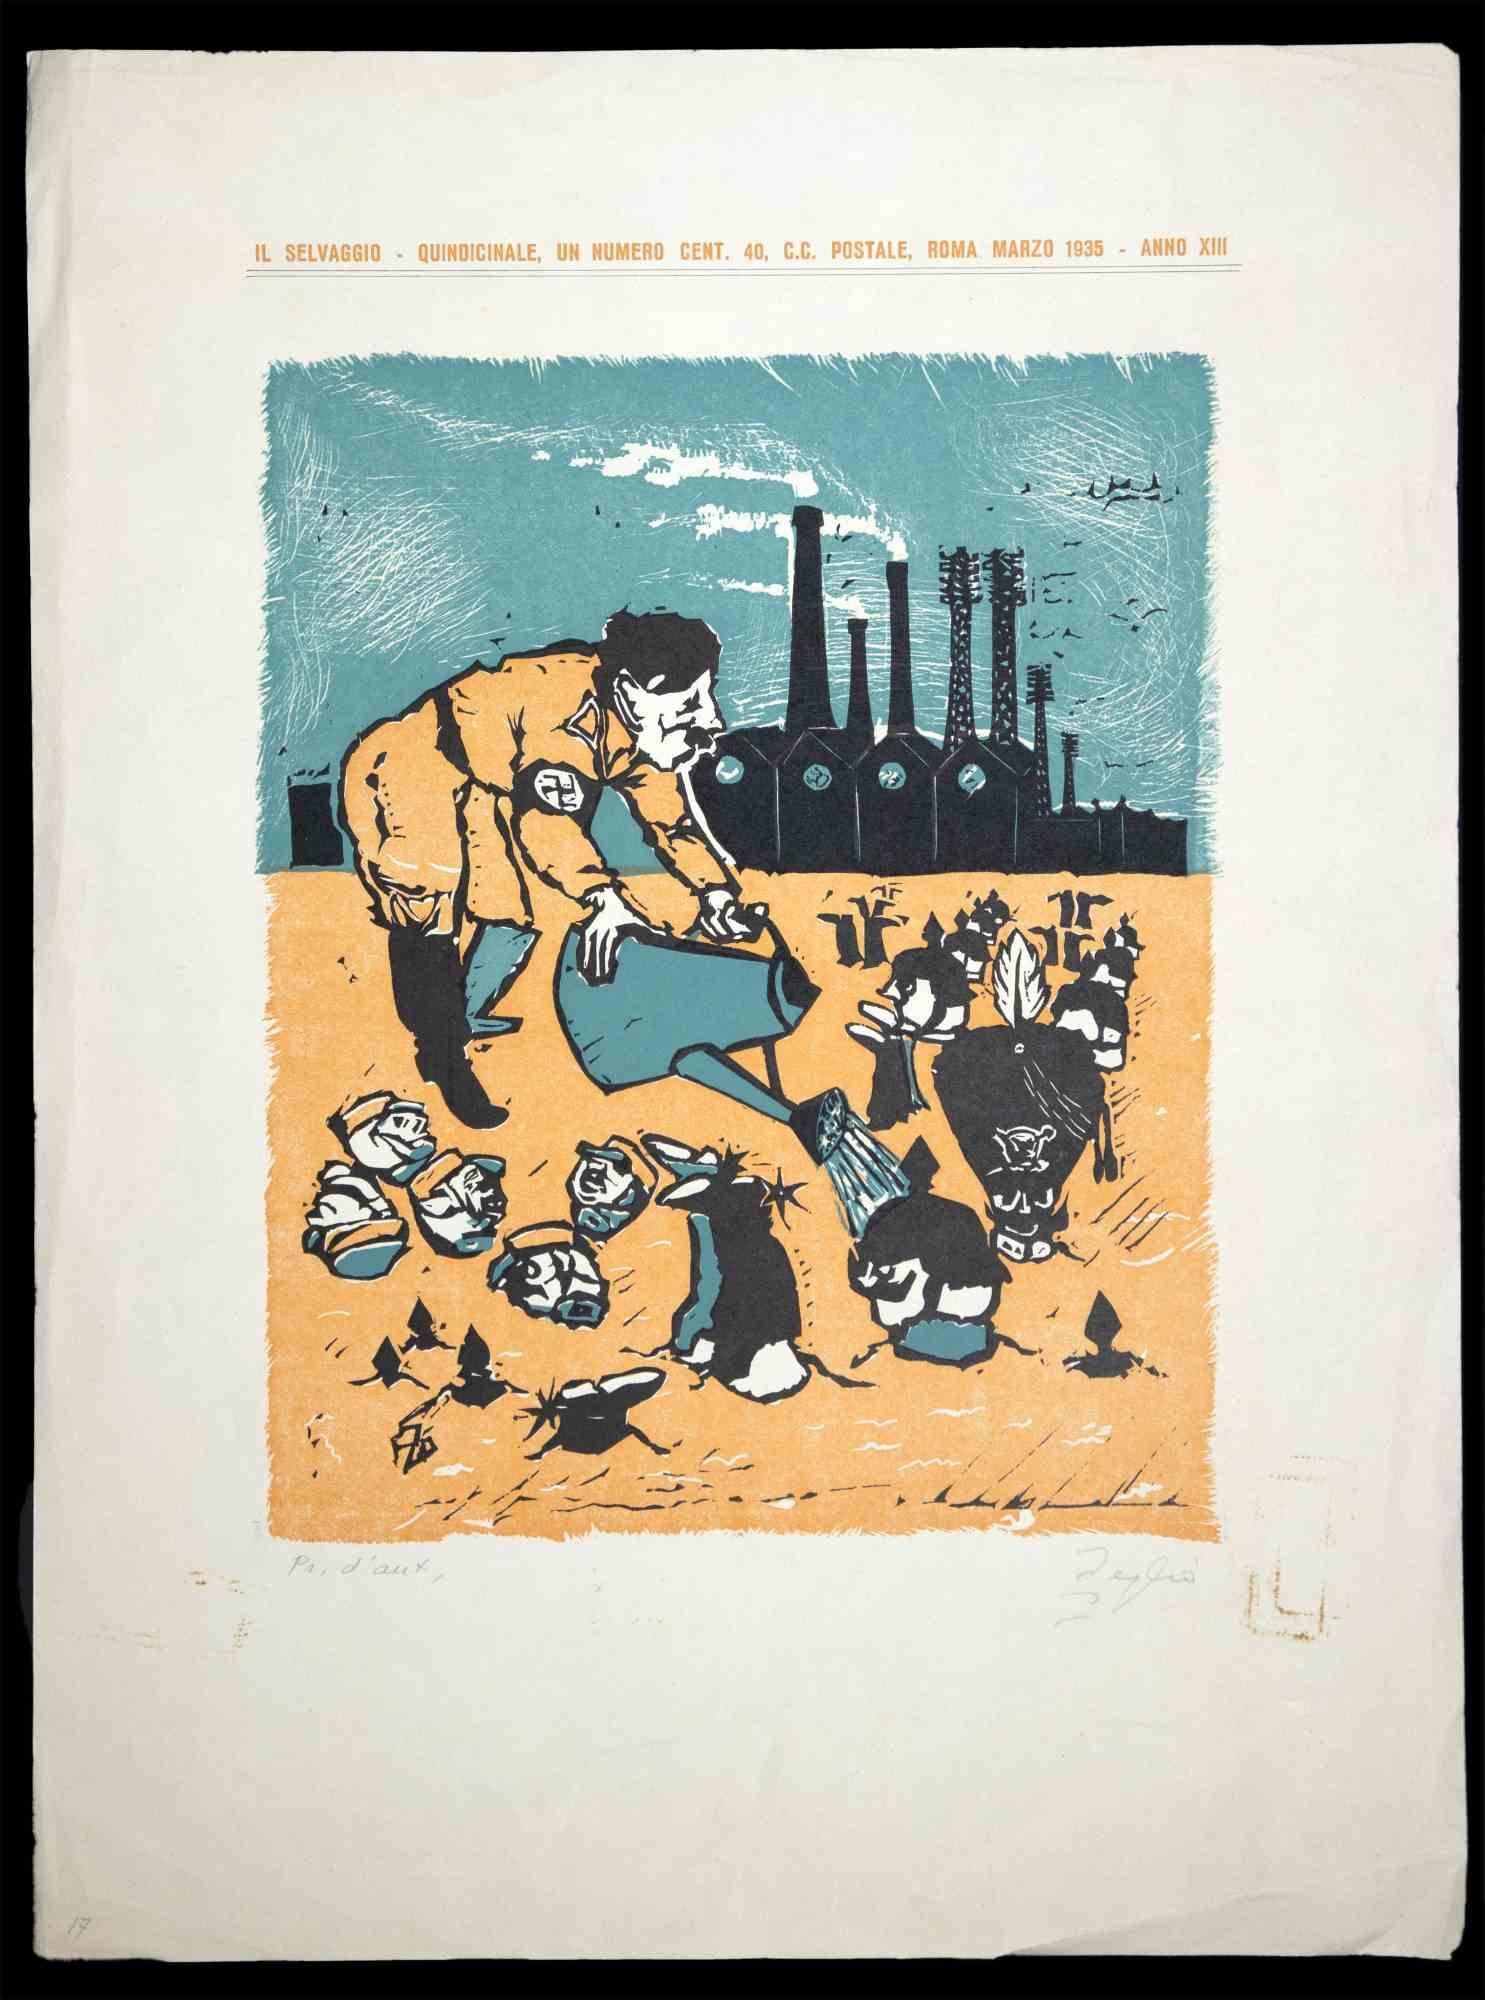 The Cultivation of Dictators is an original woodcut print by Primo Zeglio in the 1940s.

Good conditions.

The artwork is depicted through strong strokes in a well-balanced composition.